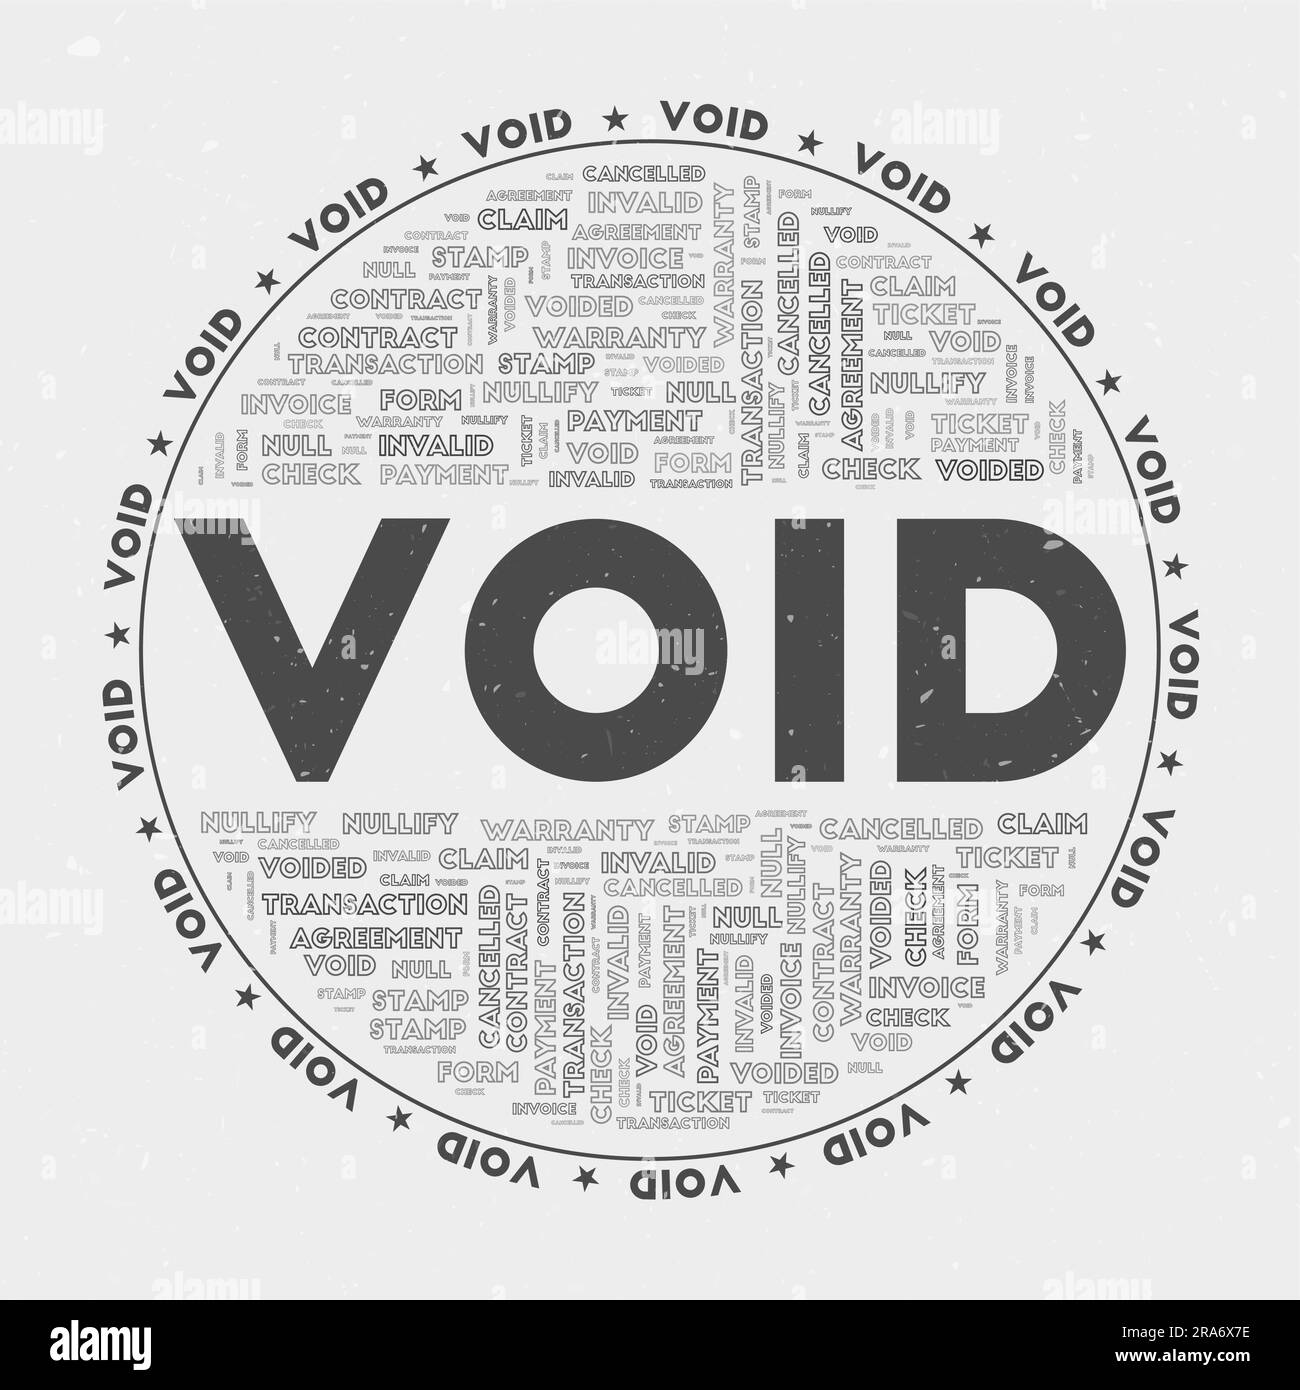 Void - round badge. Text void with keywords word clouds and circular text. Shady Character color theme and grunge texture. Captivating vector illustra Stock Vector